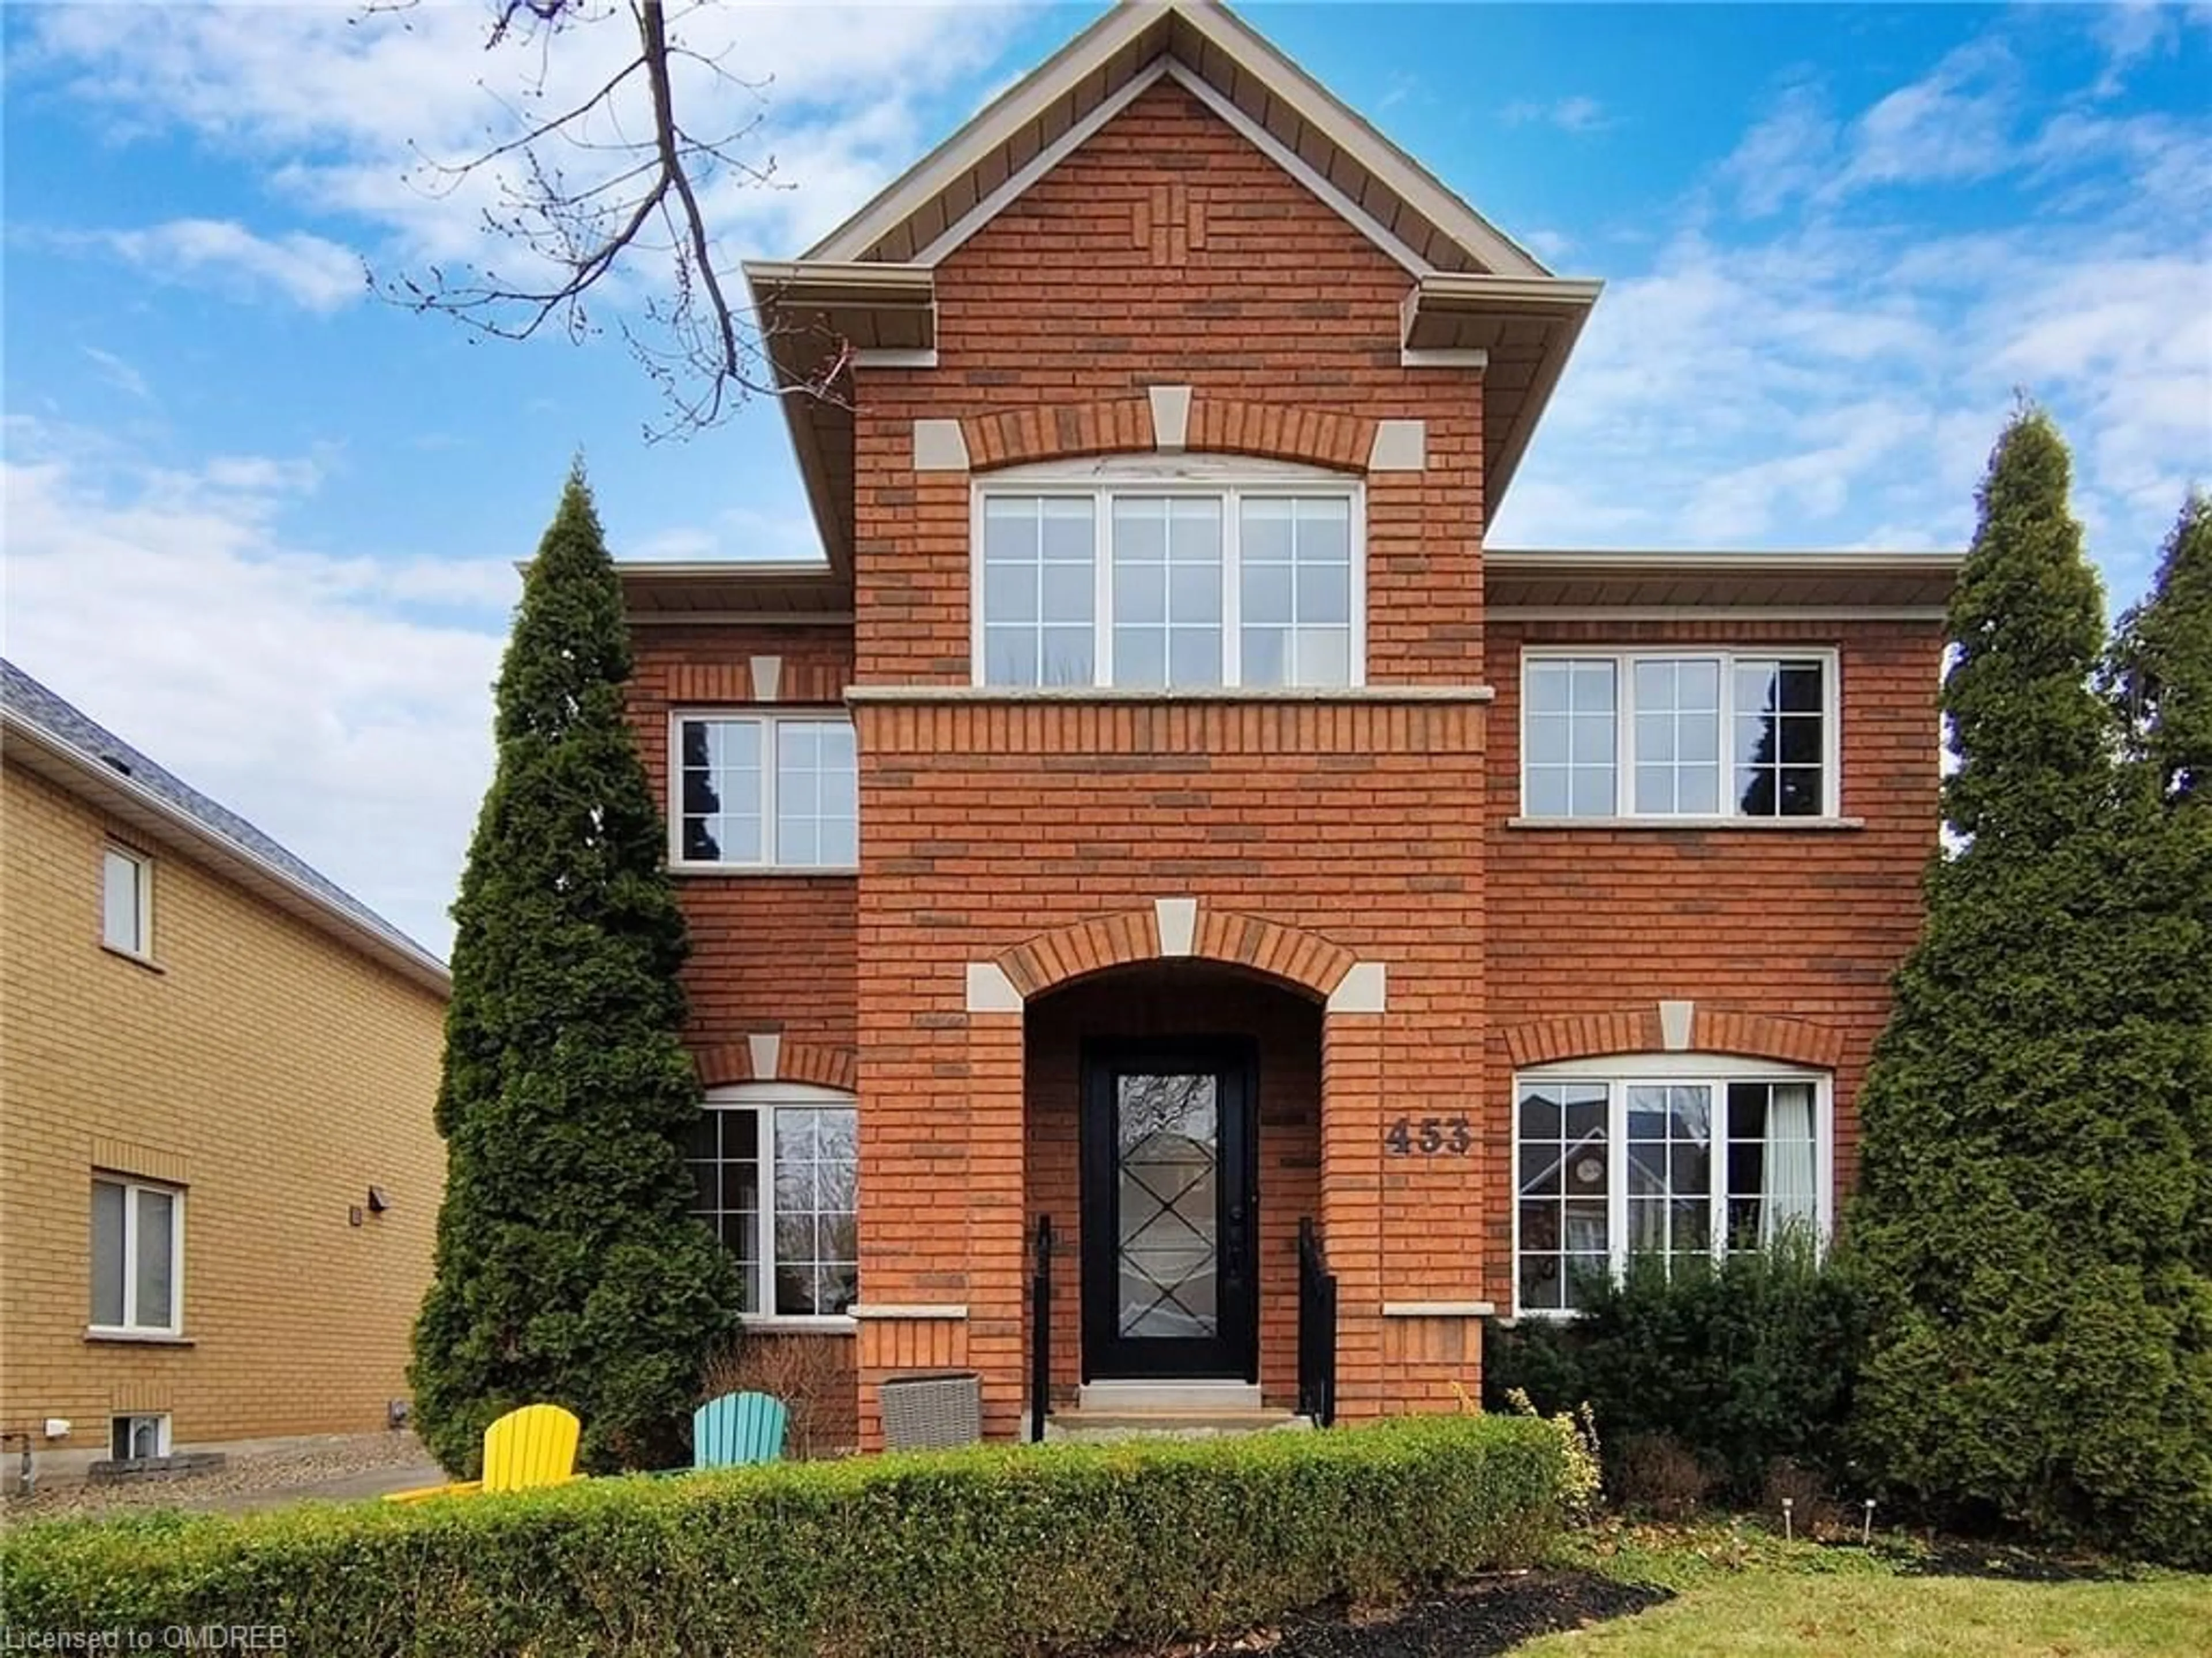 Home with brick exterior material for 453 Ambleside Dr, Oakville Ontario L6H 6N7